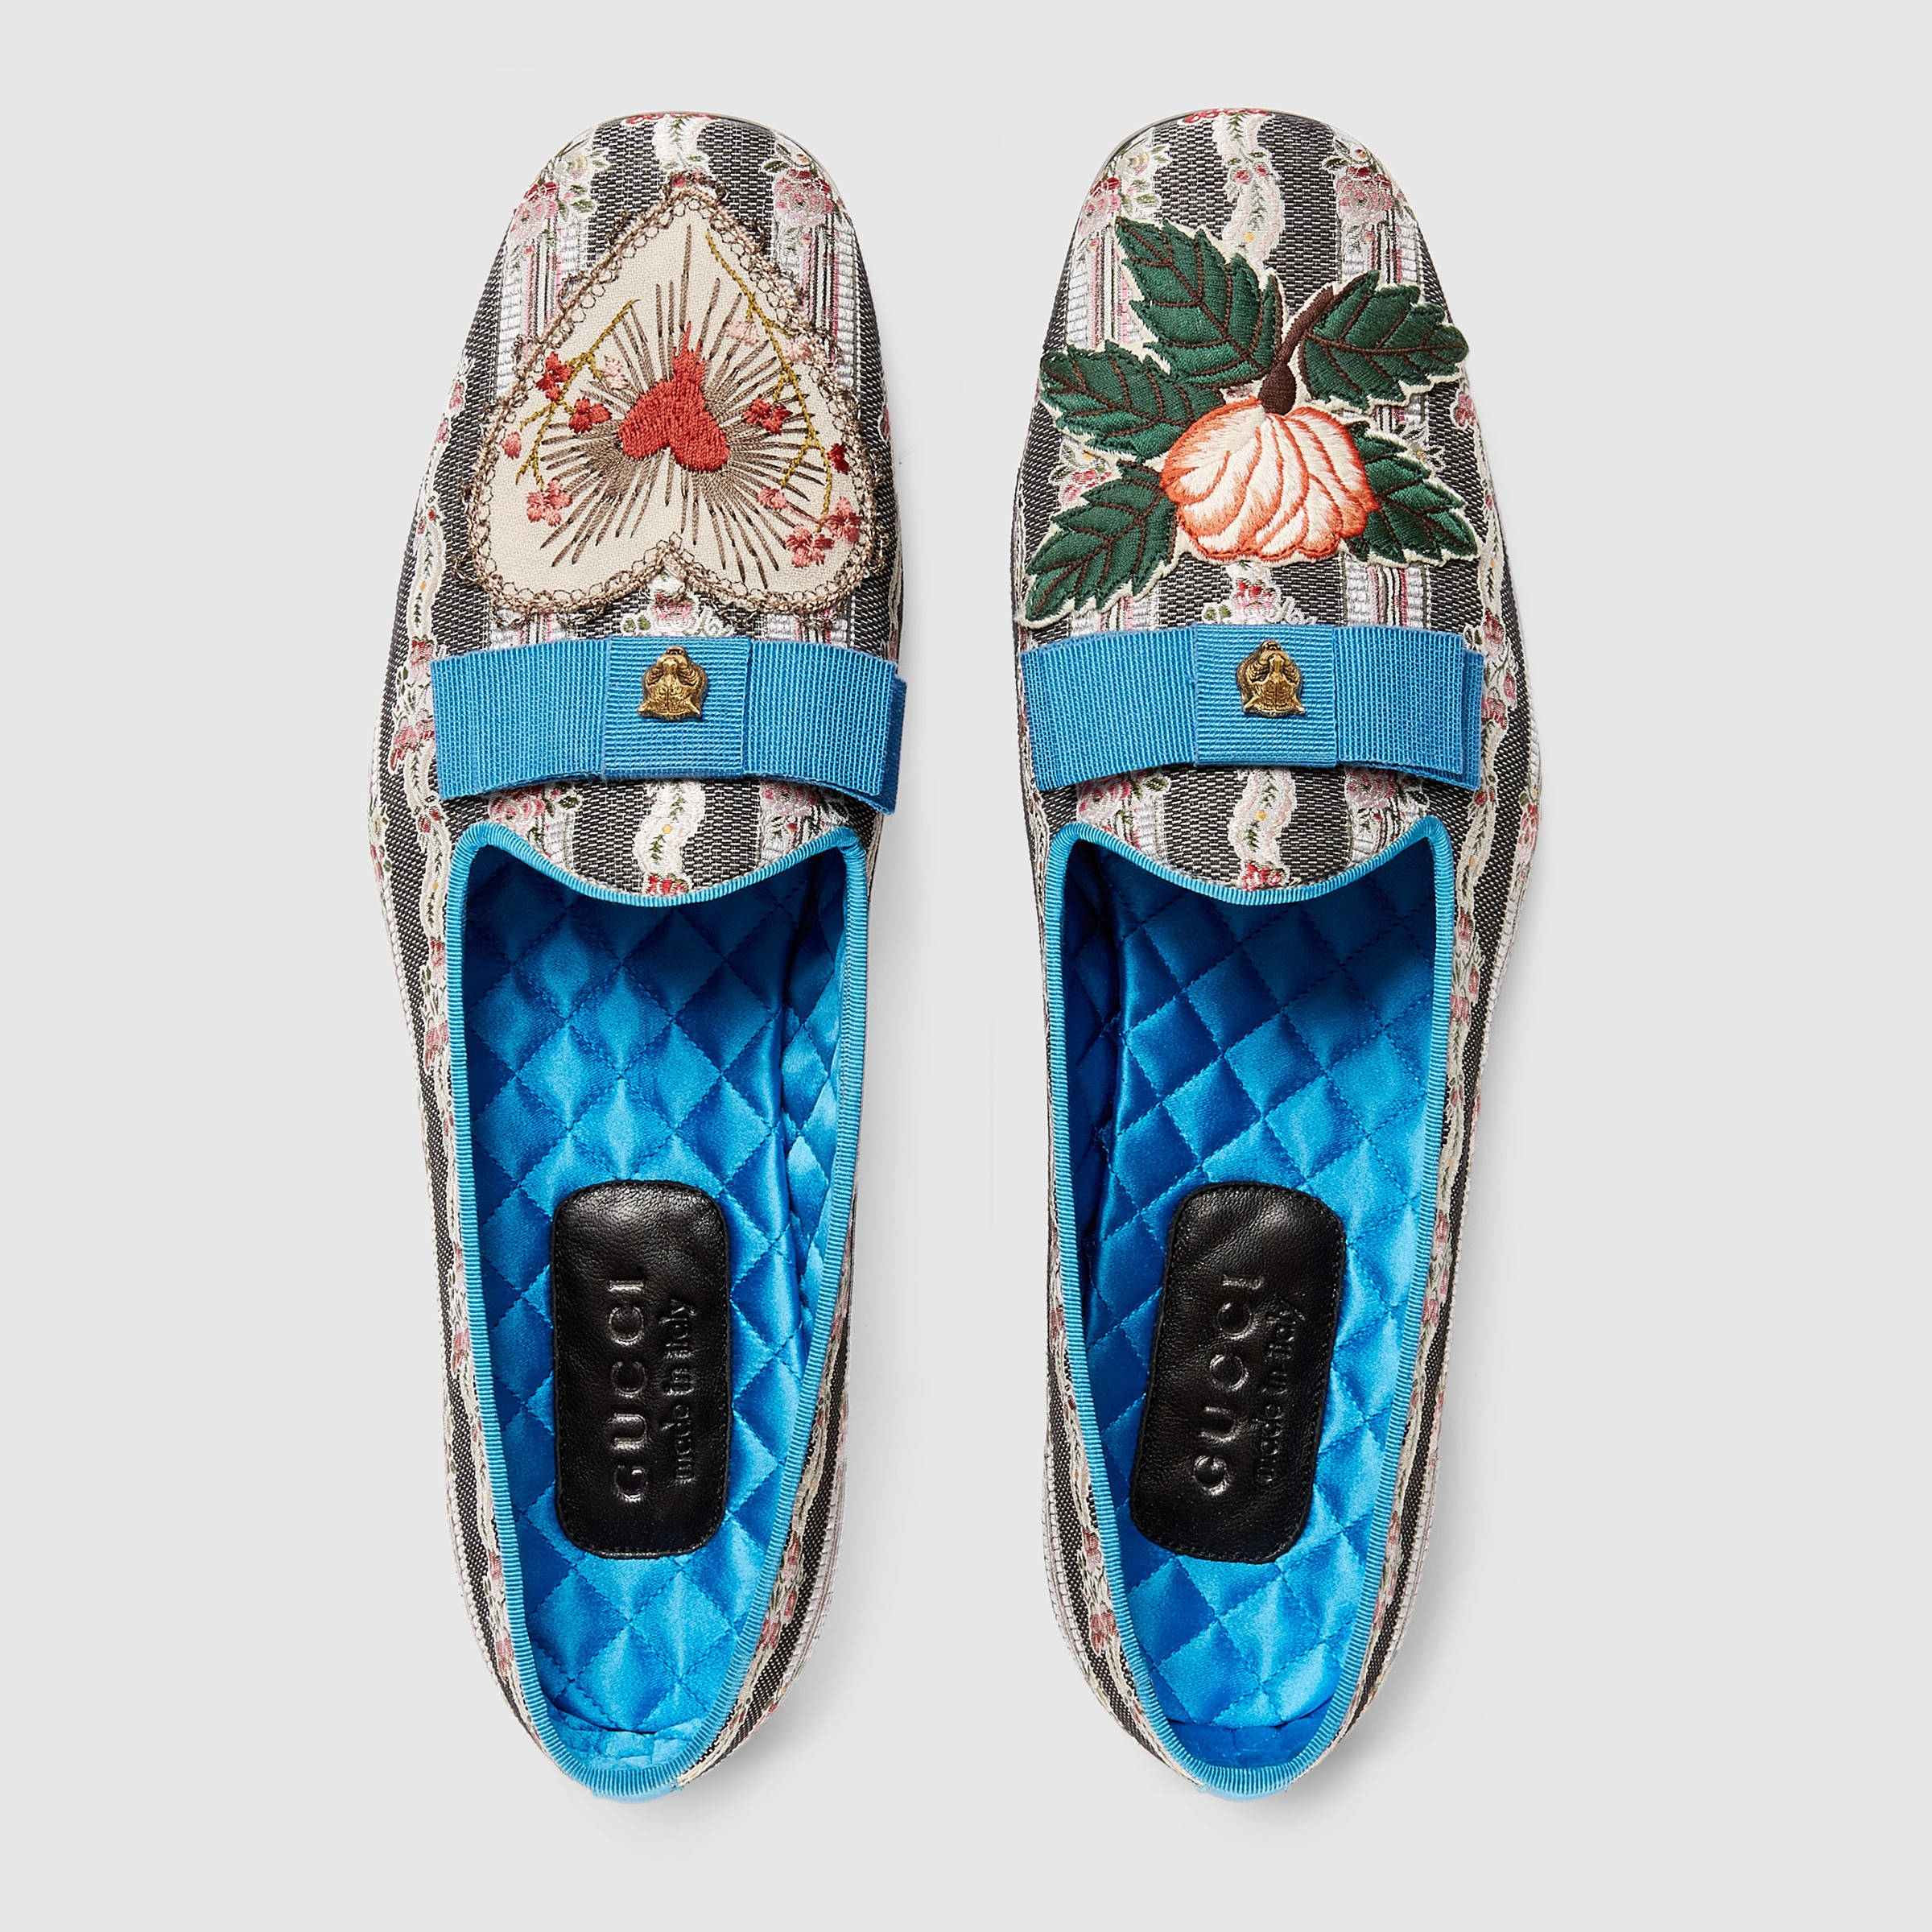 Lyst - Gucci Embroidered Jacquard Loafers in Metallic